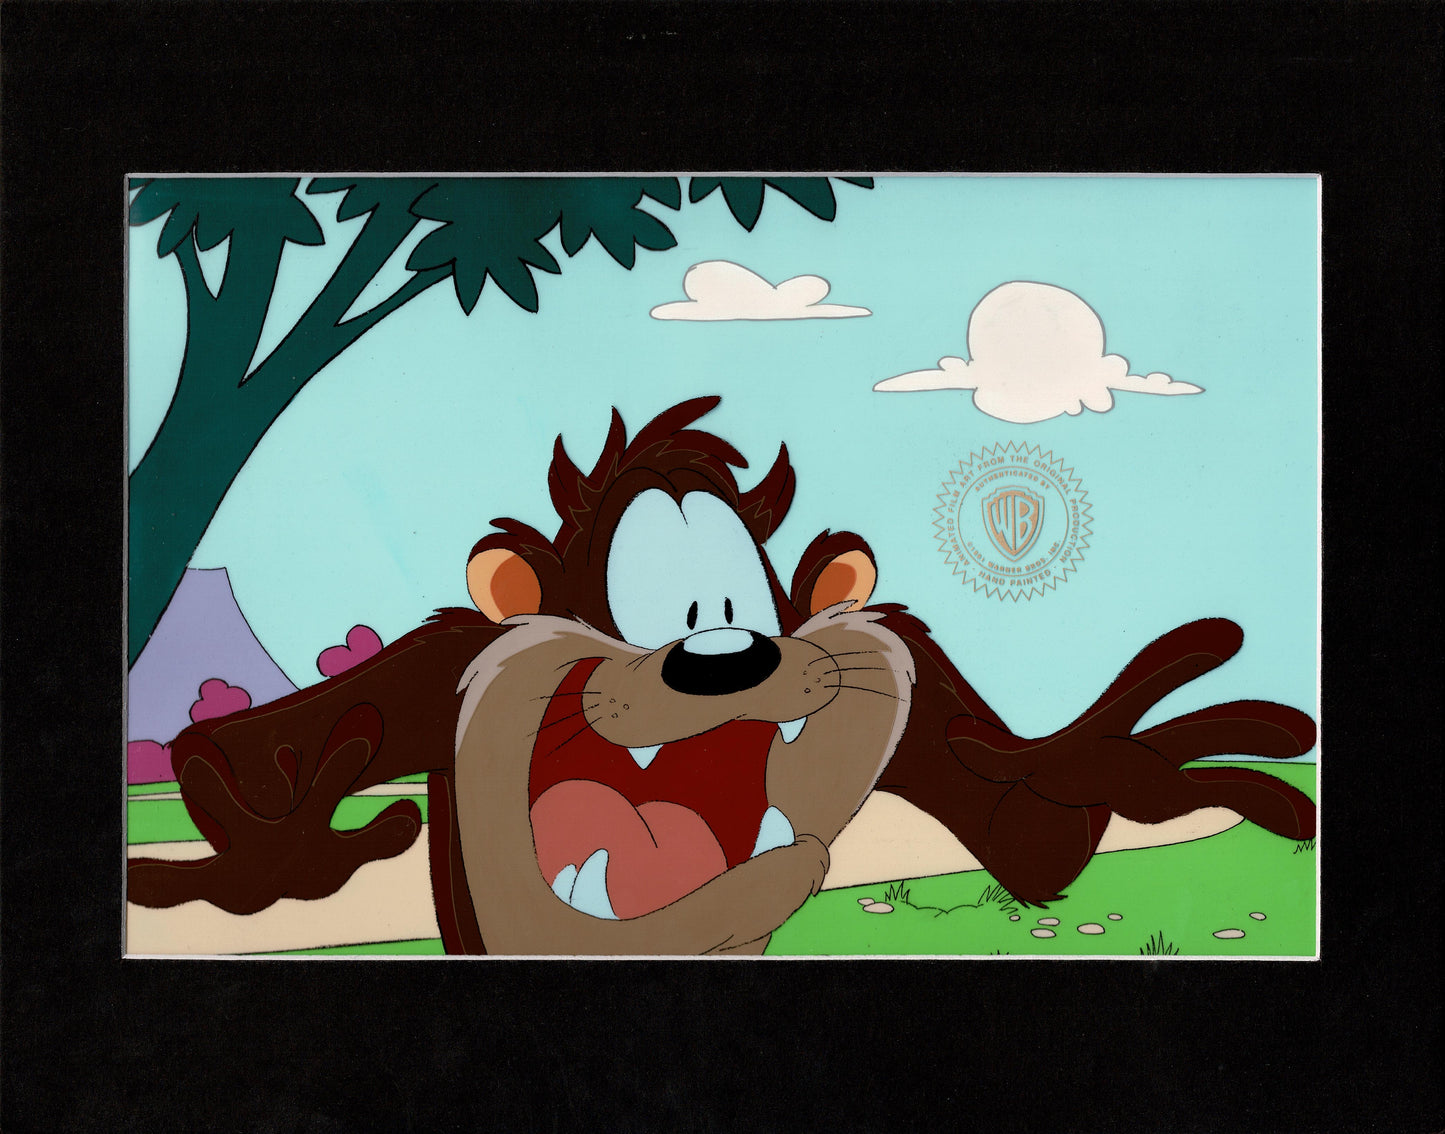 Tazmania Warner Brothers Looney Tunes Production Cel and OBG Cels 1994